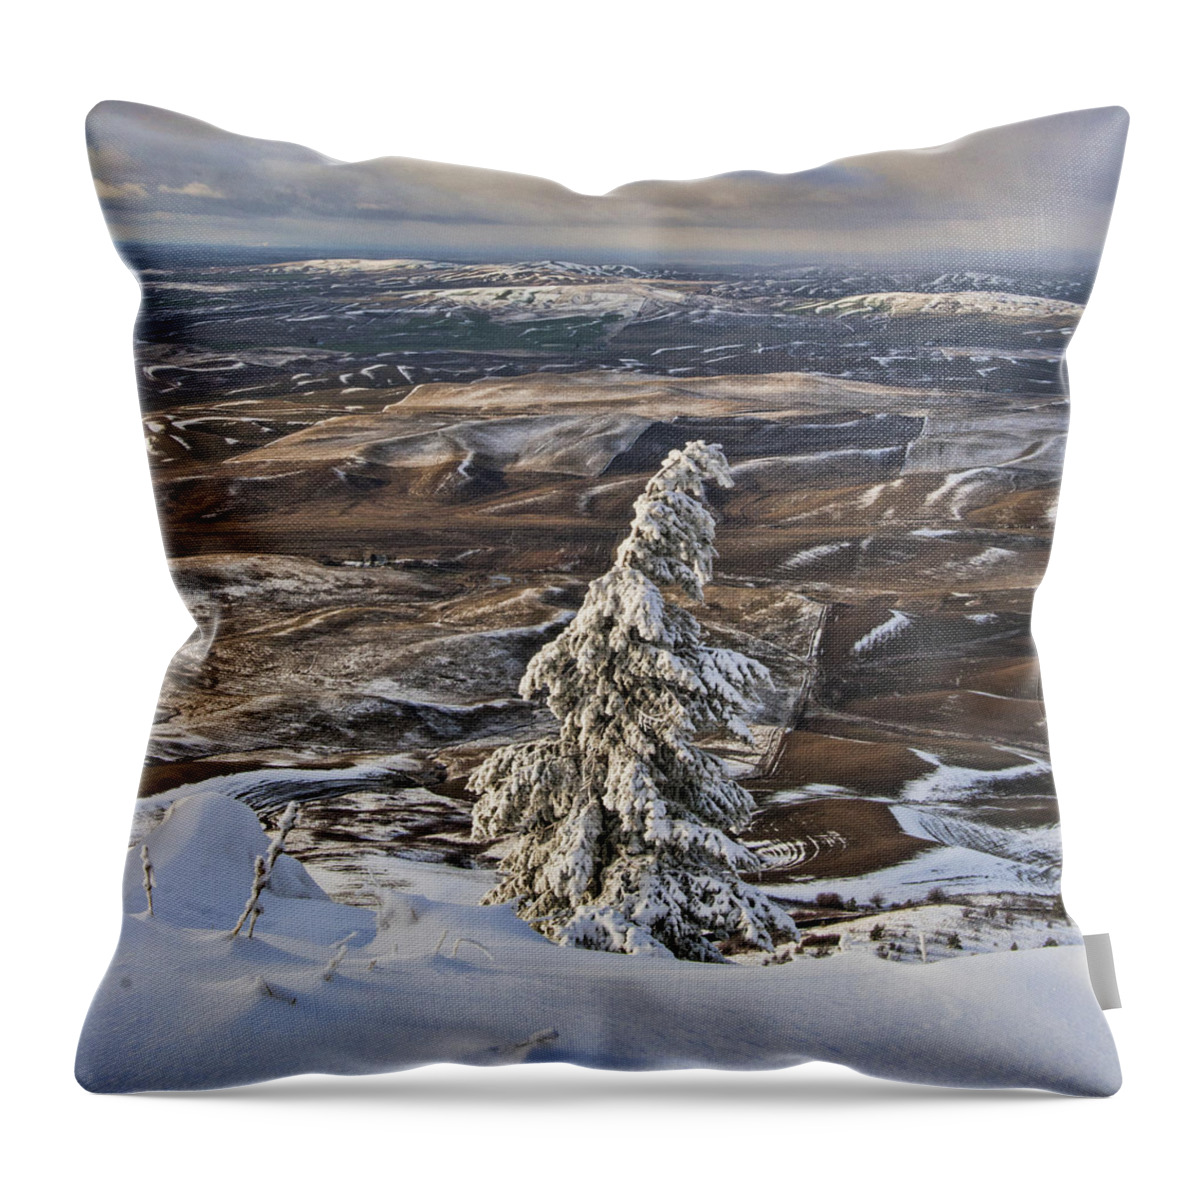 steptoe Butte Throw Pillow featuring the photograph Snowy Day In The Palouse by Paul DeRocker